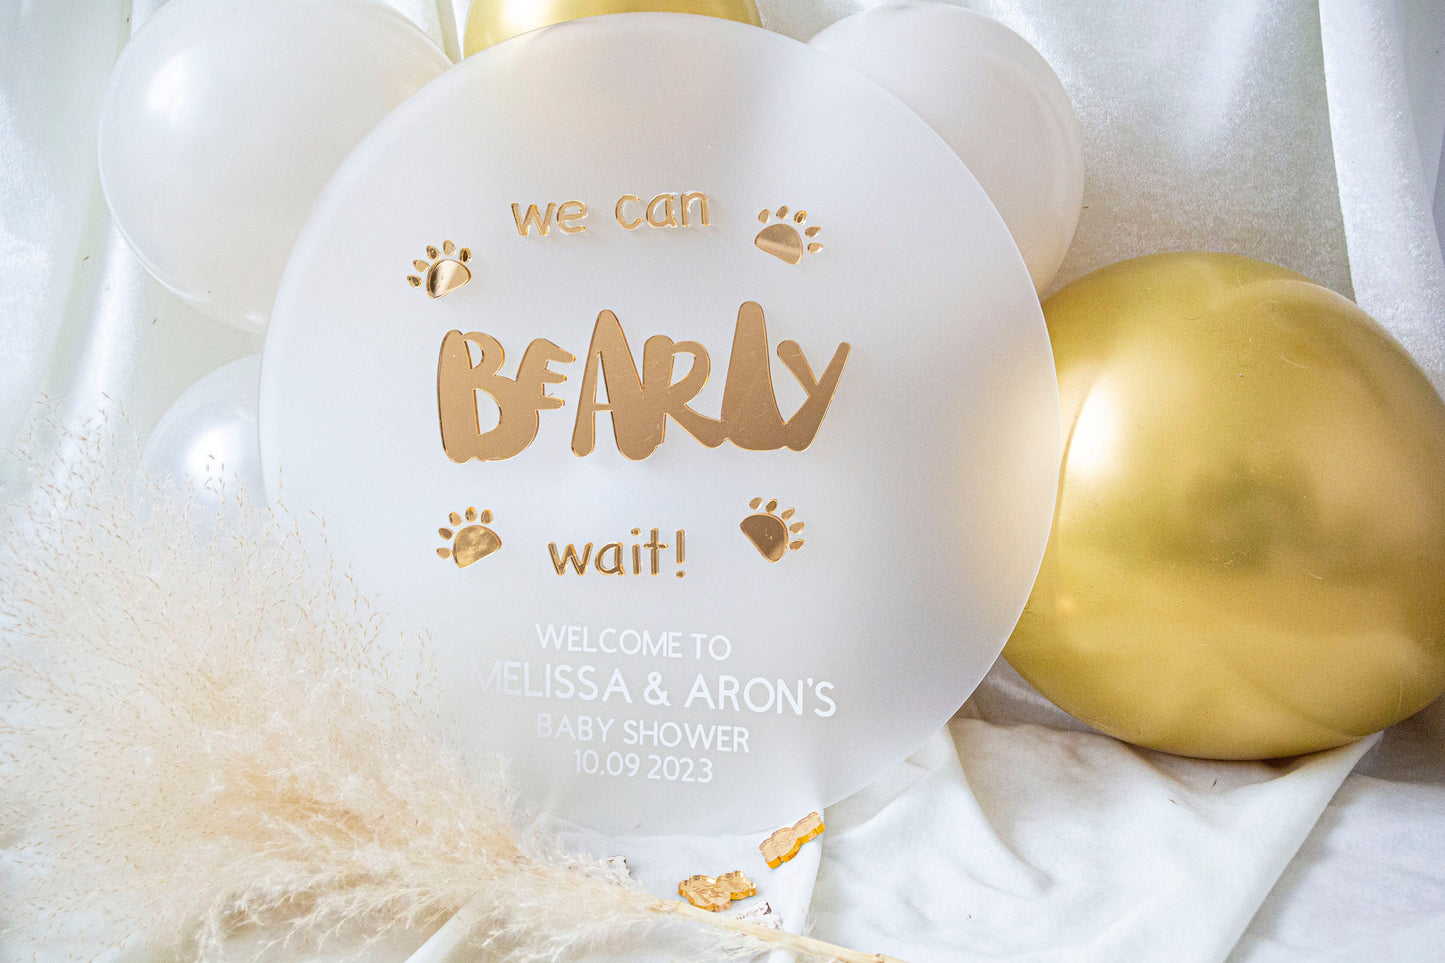 We Can Bearly Wait | Boy Shower Invitation | Bear Balloon Baby Shower Sign |  Gender Neutral Baby Shower | Bear Theme Baby Shower | Acrylic